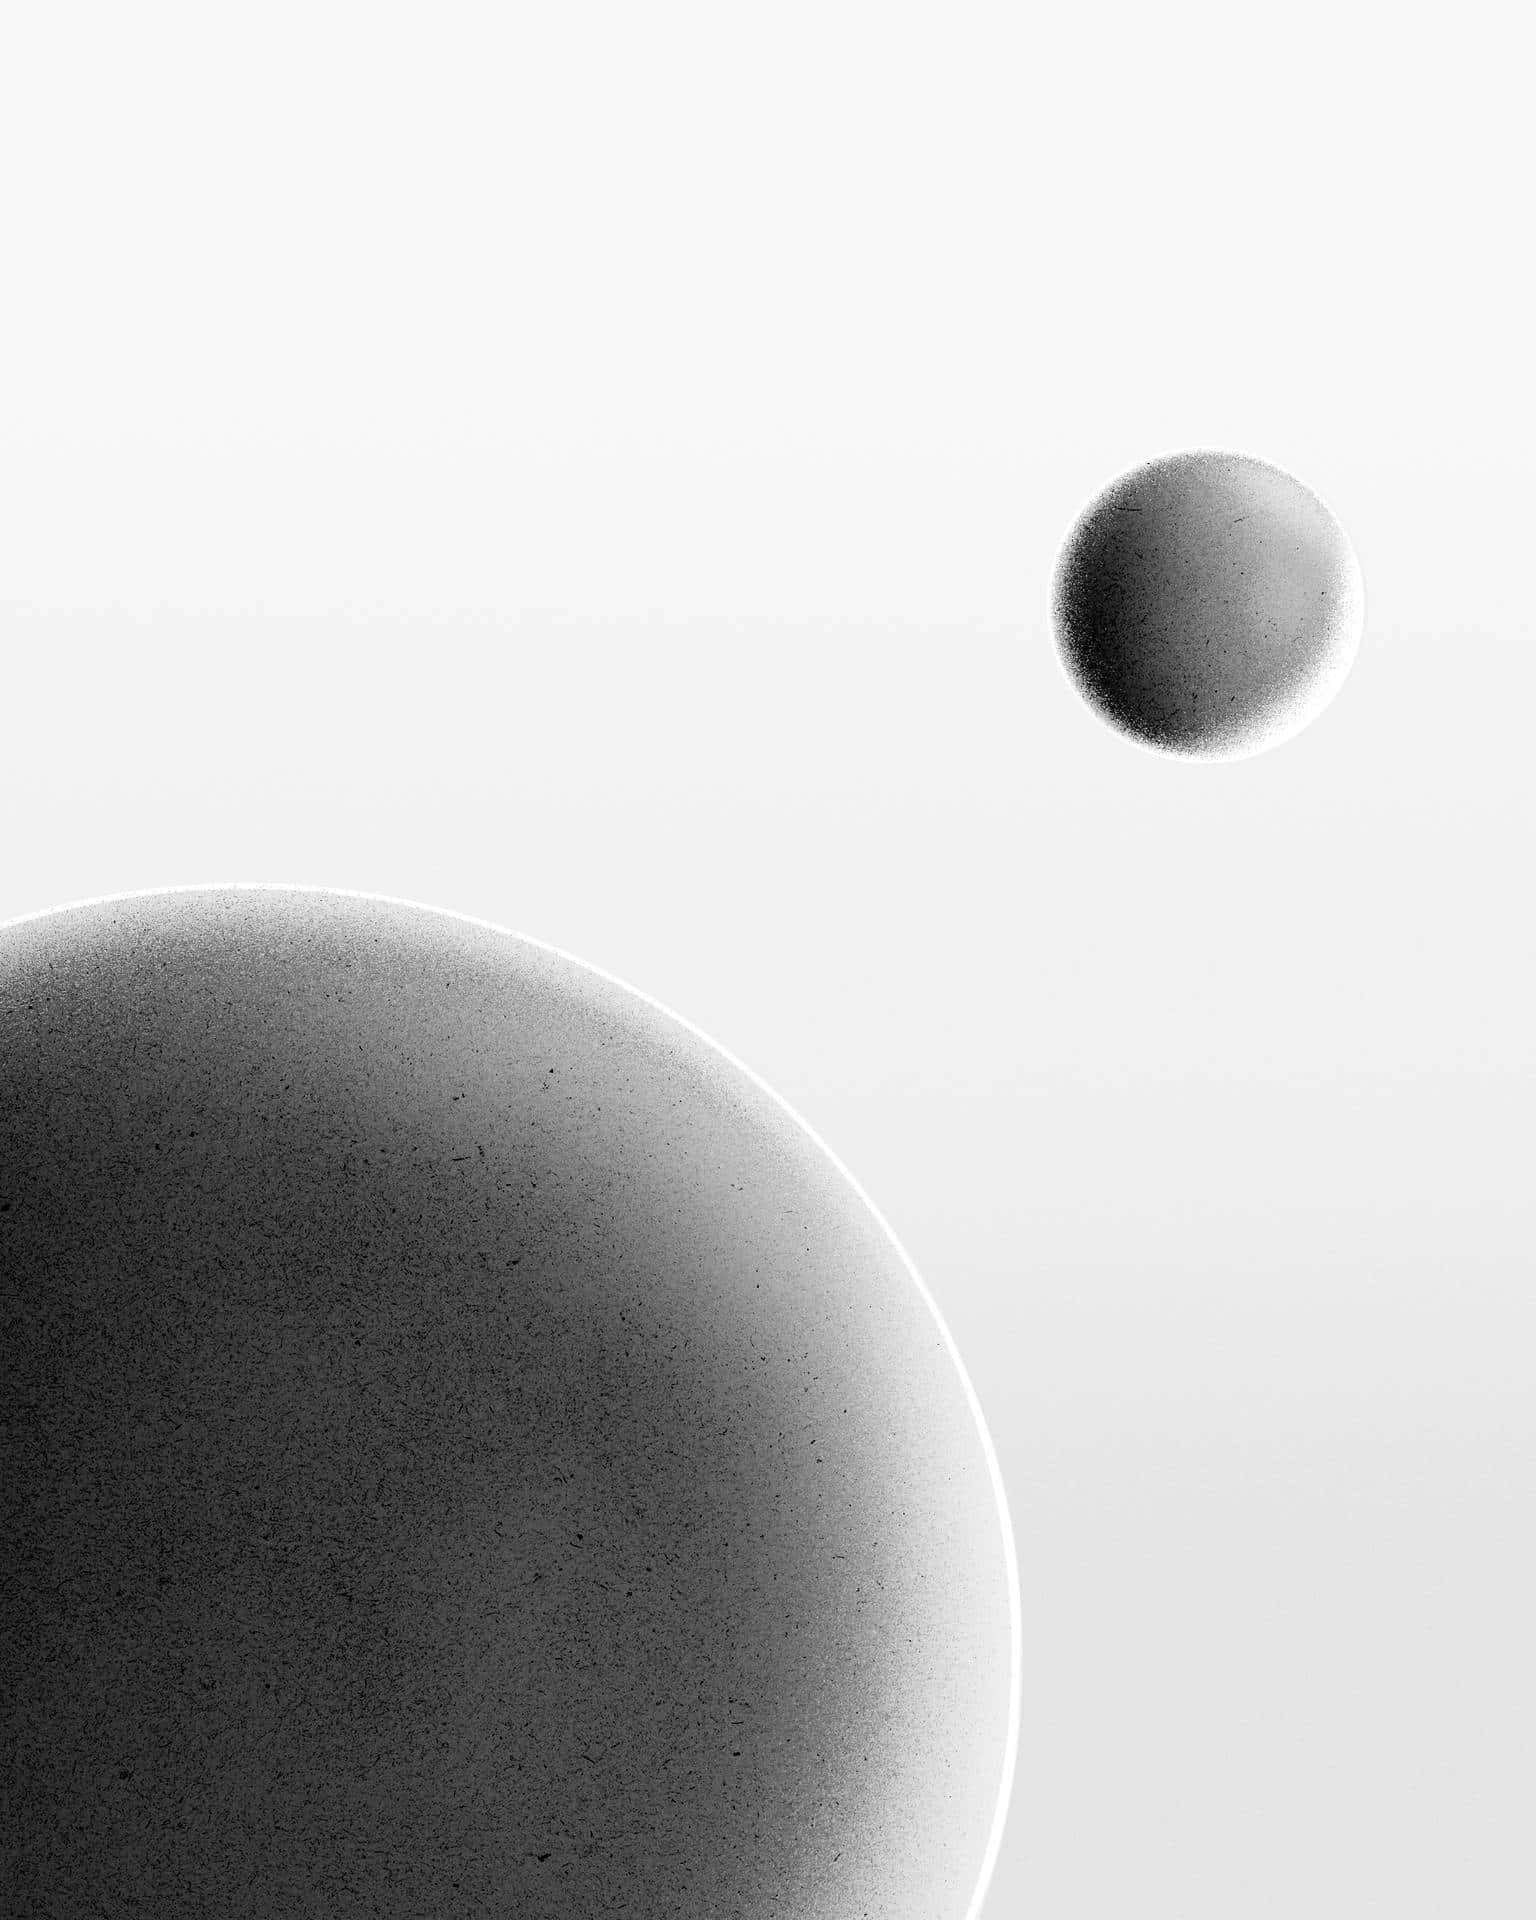 A Black And White Image Of Two Spheres